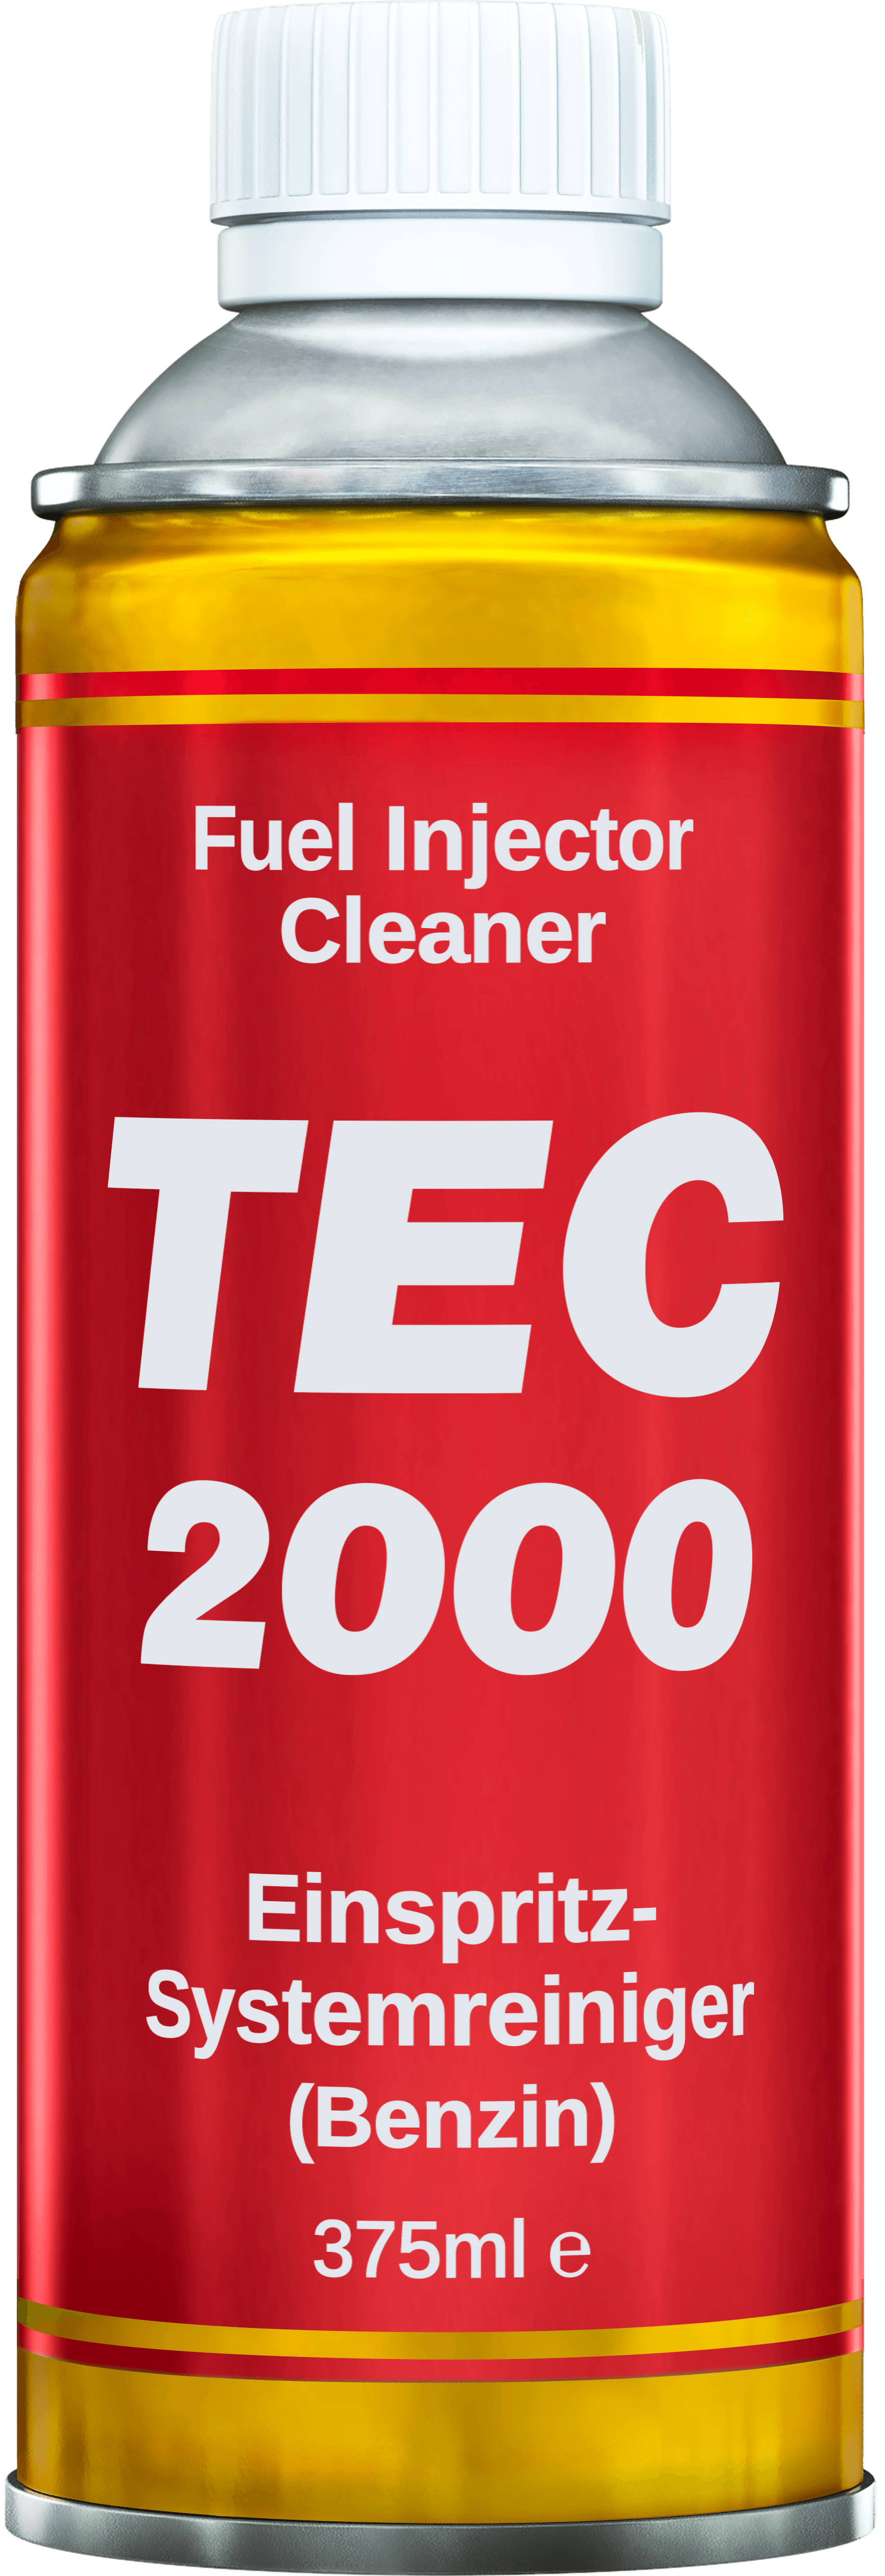 TEC 2000 Fuel Injector Cleaner product